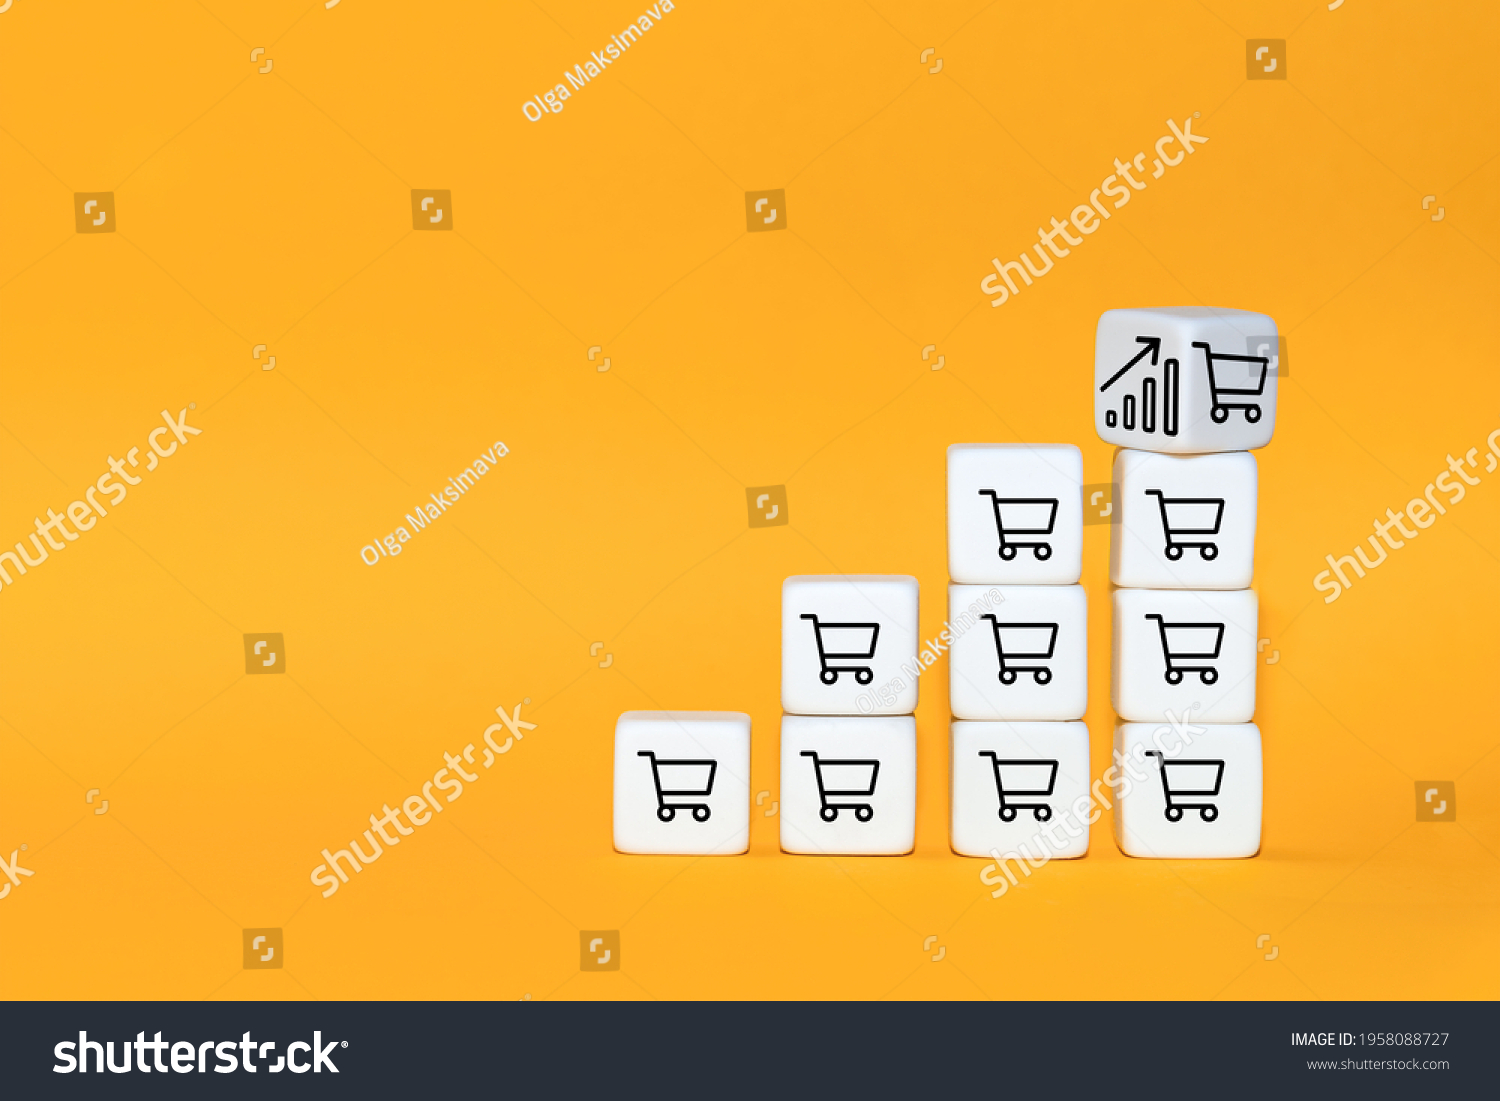 Sale volume increase make business grow. The cube turns over with icon graph and shopping cart symbol. #1958088727